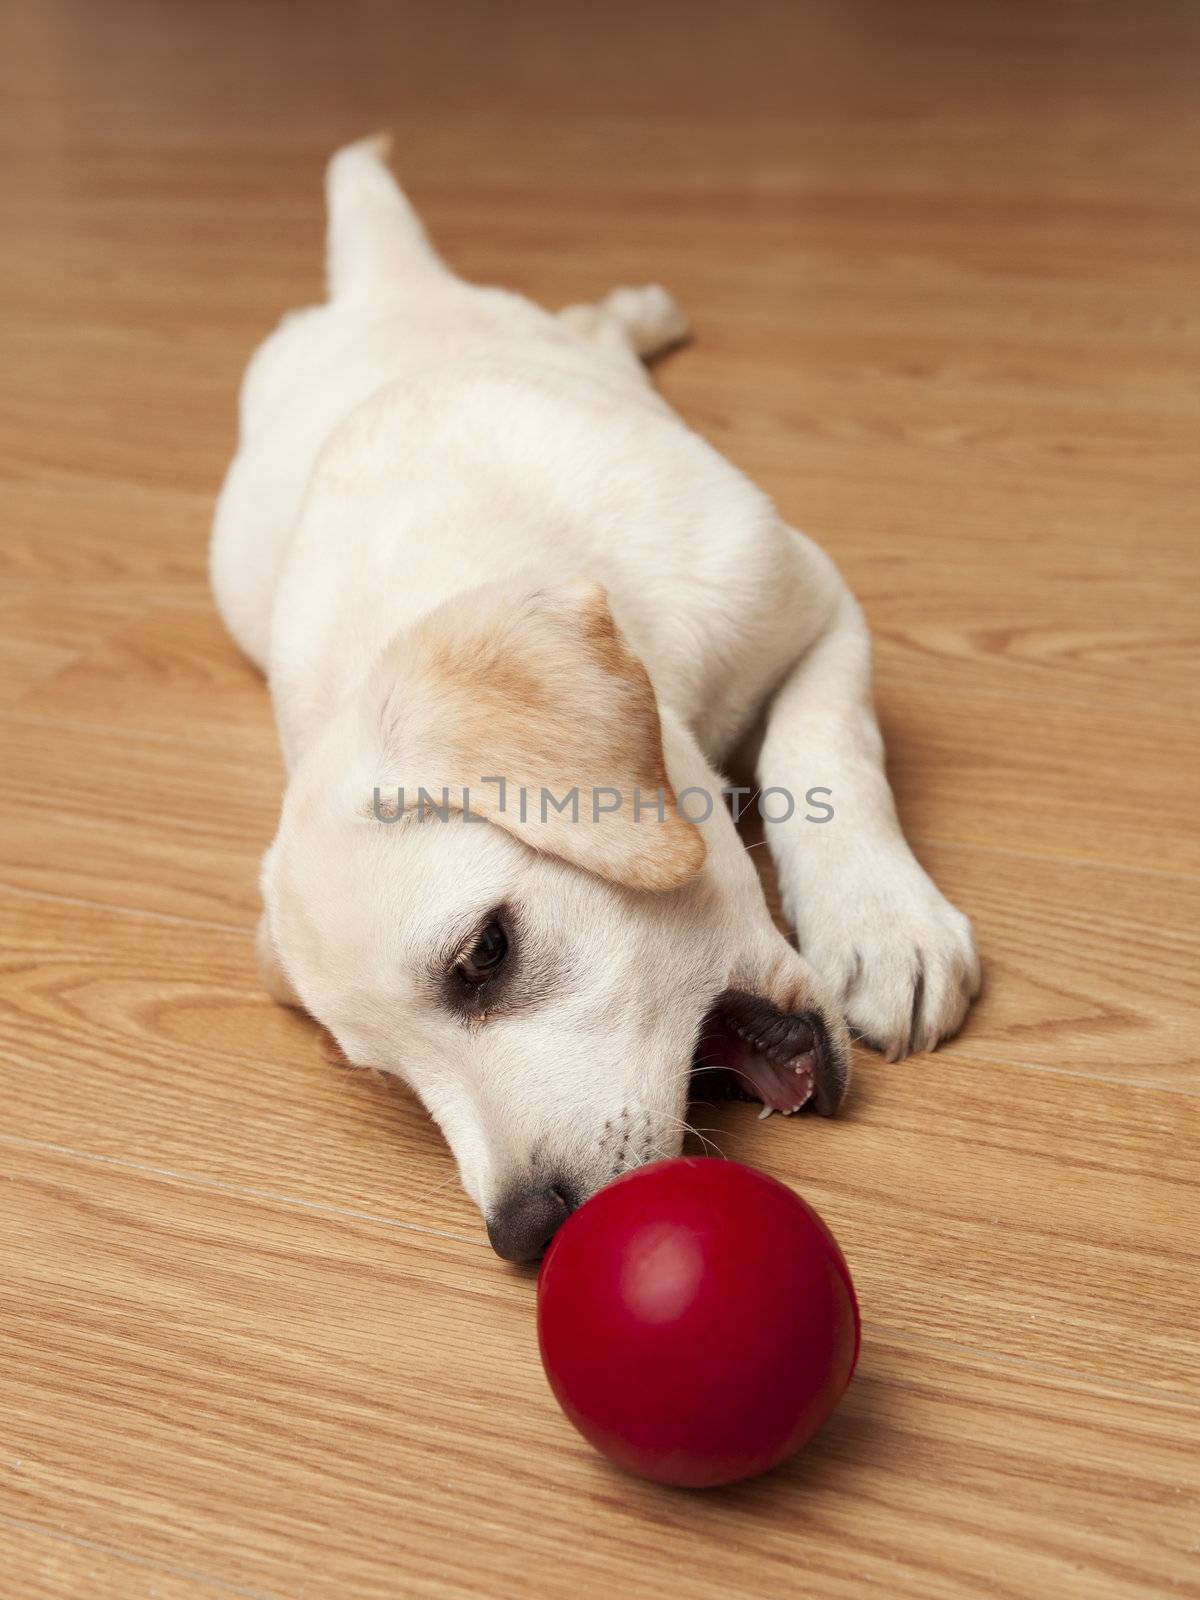 Labrador retriever puppy lying on the floor and playing with a red ball